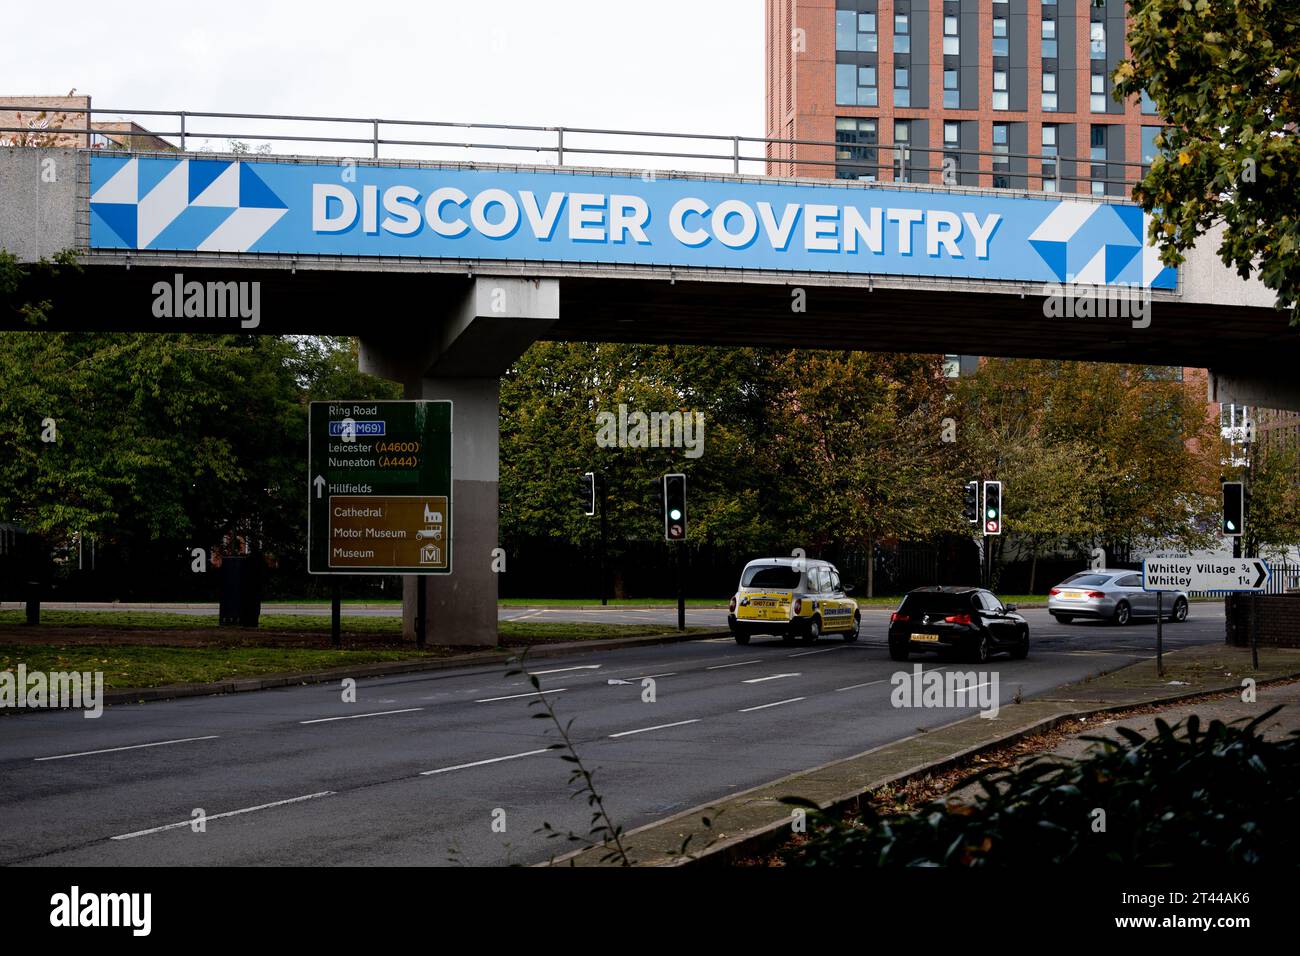 Discover Coventry on a ring road flyover, Coventry, West Midlands, England, UK Stock Photo